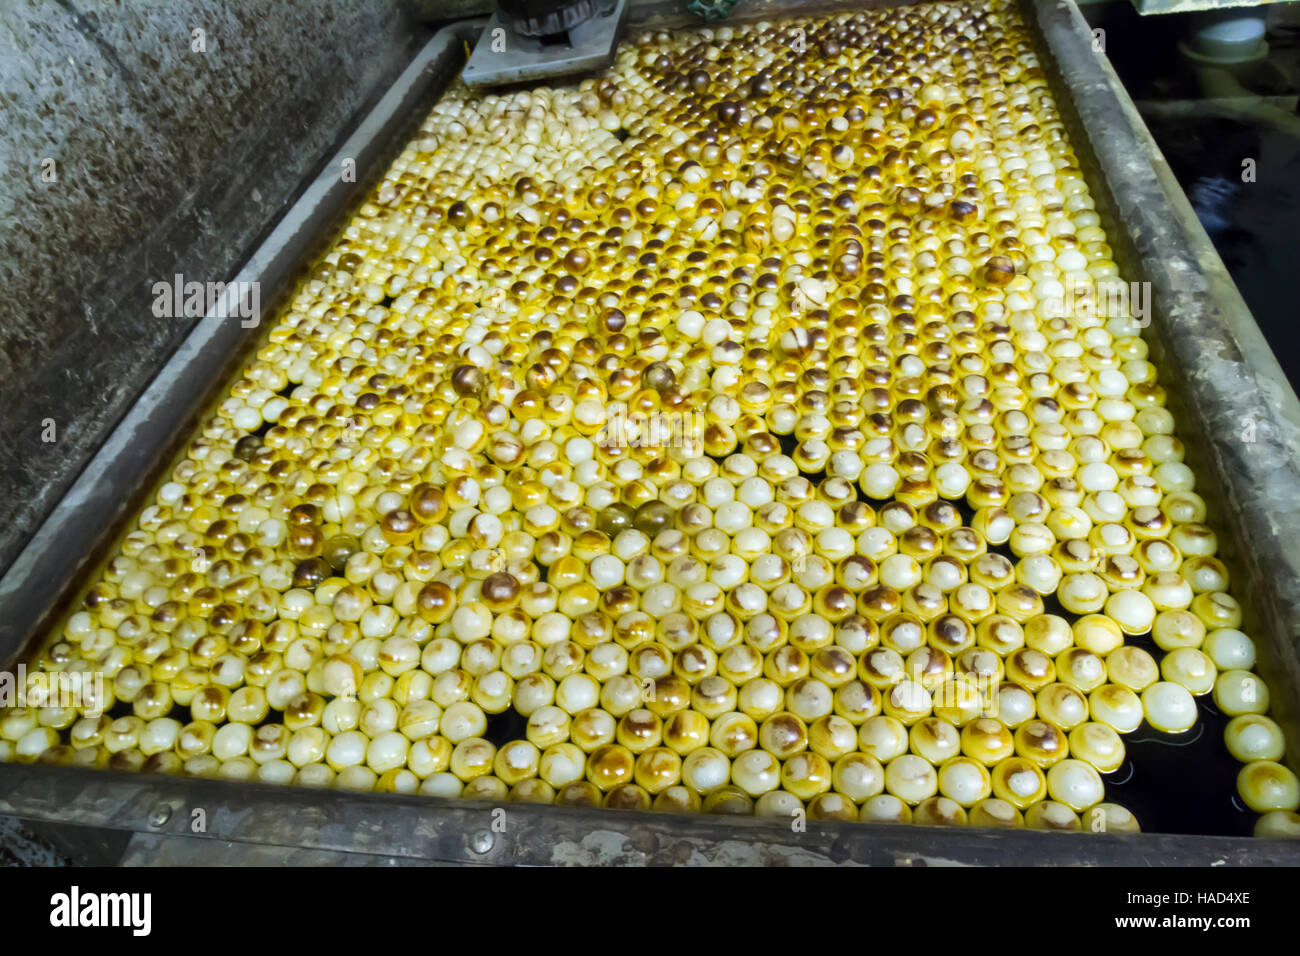 Ping pong balls floating in acid bath in metal tray. Stock Photo